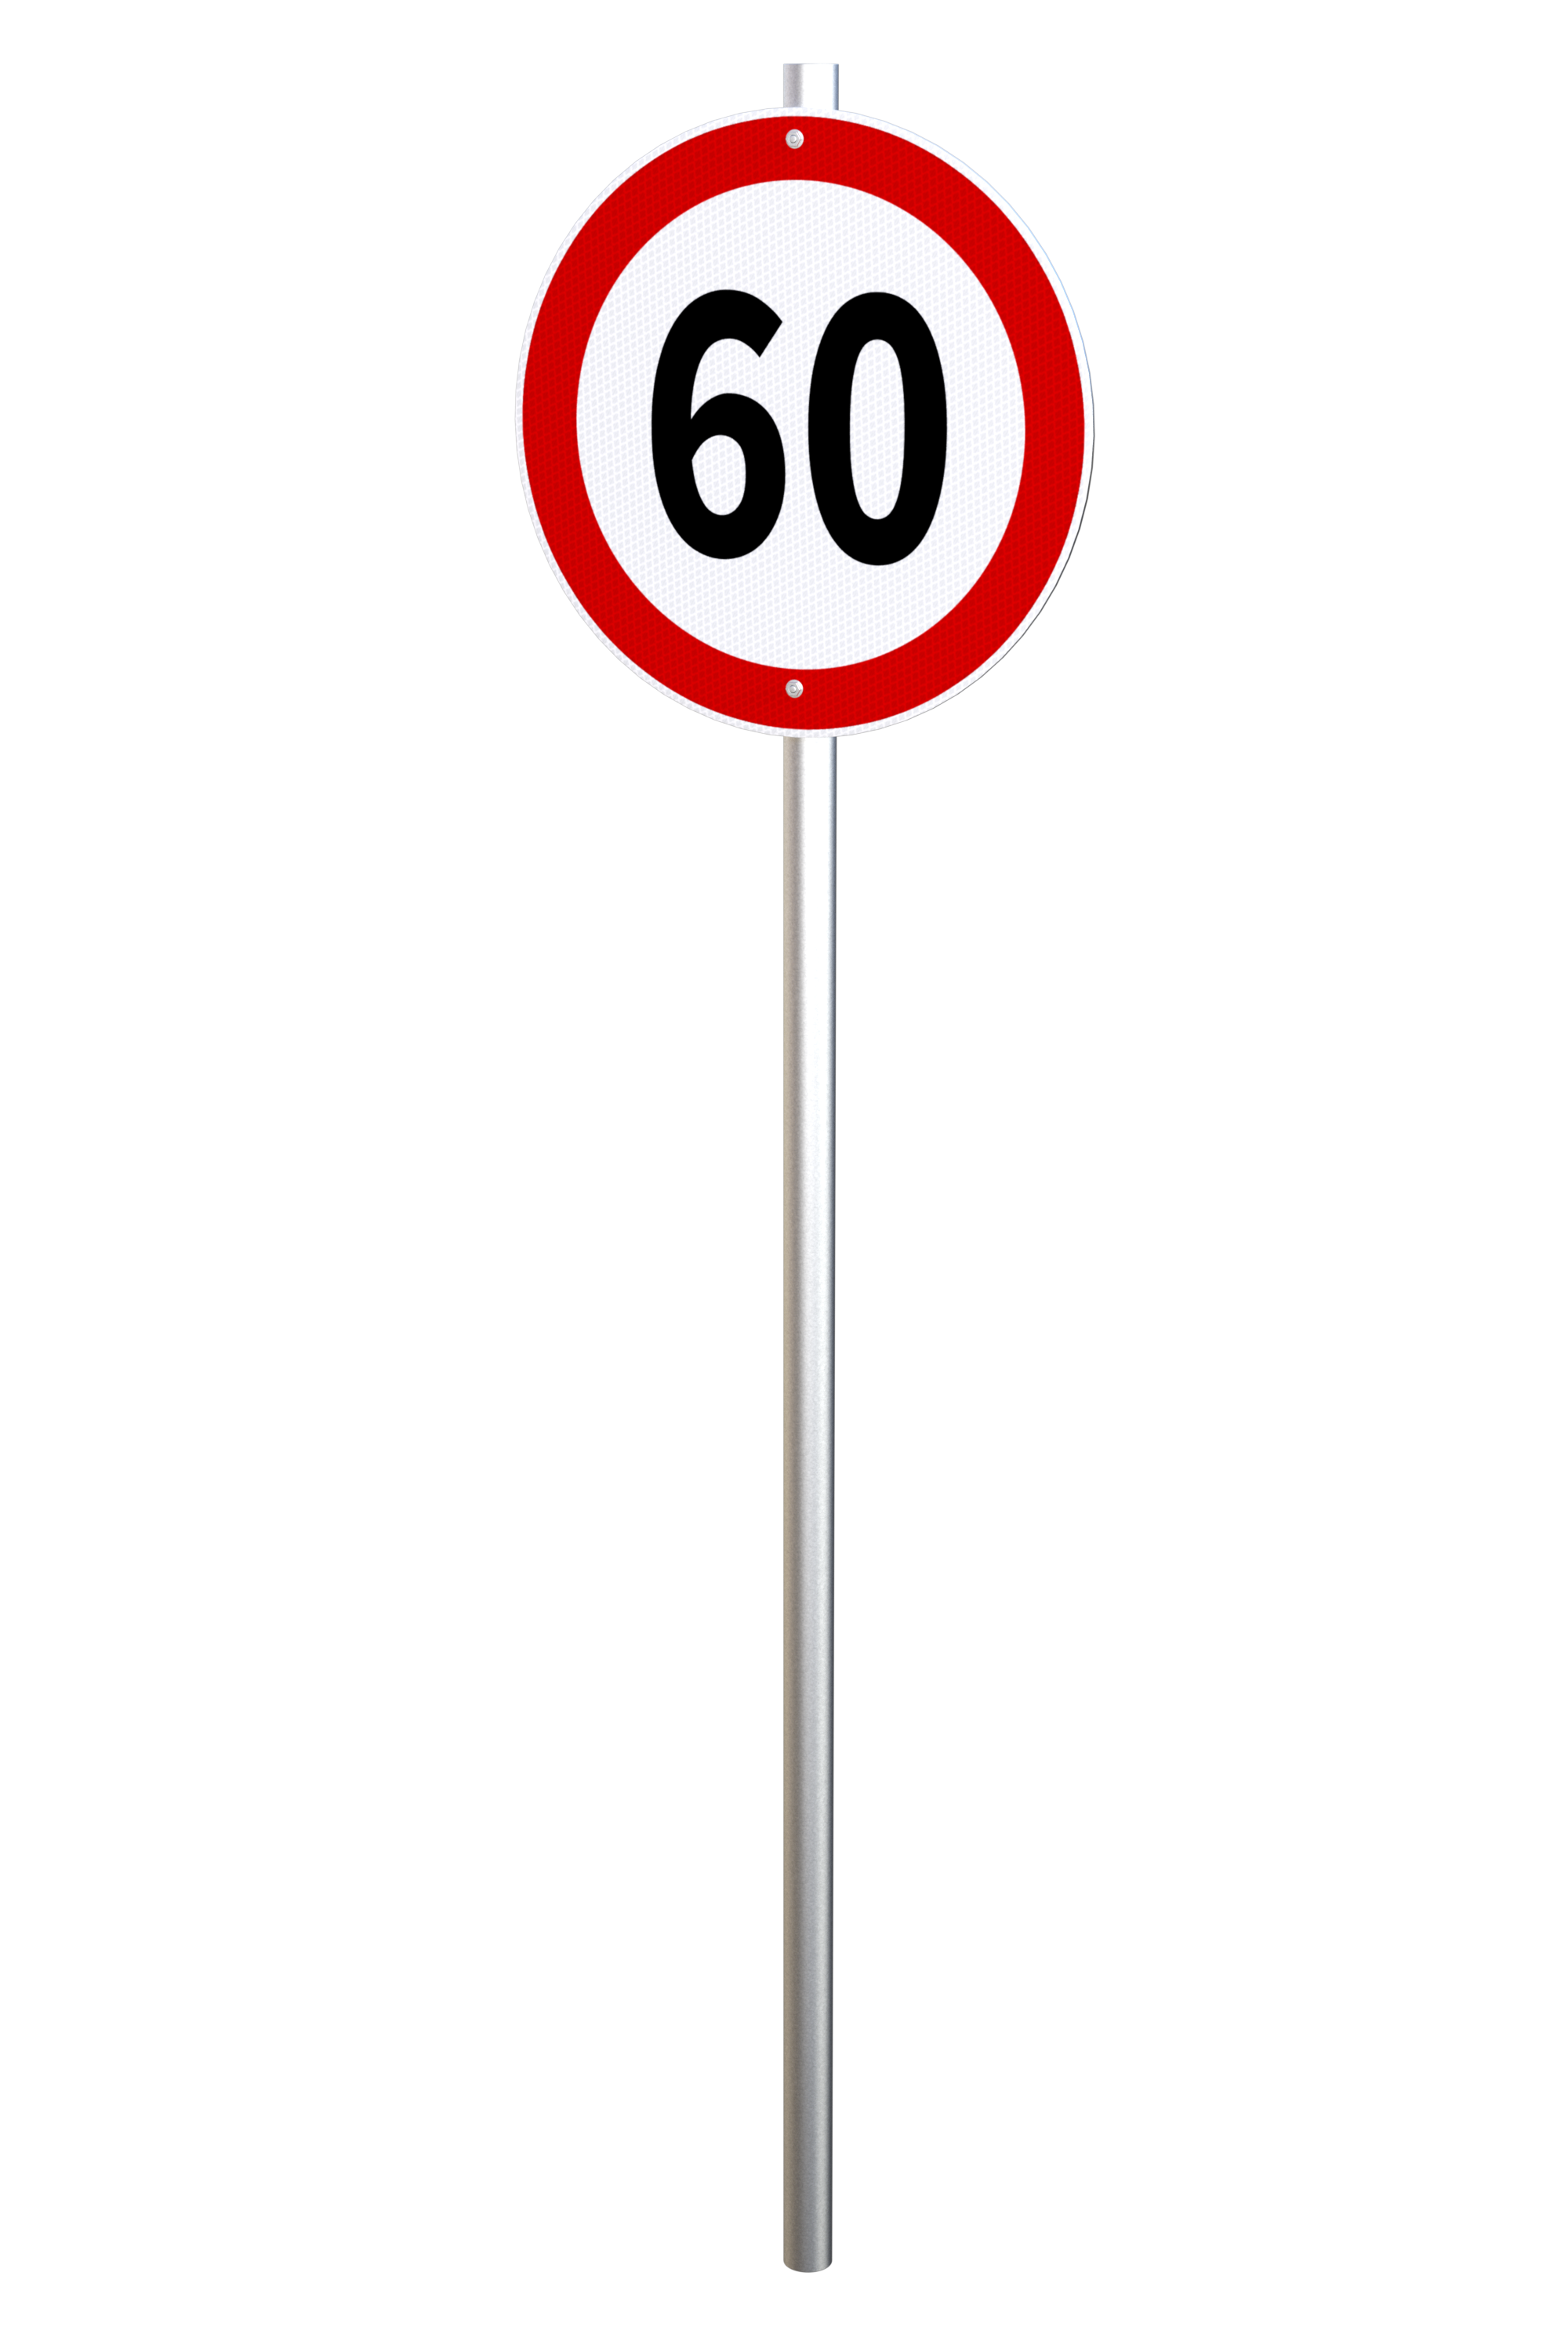 Speed limit sign traffic road free image download